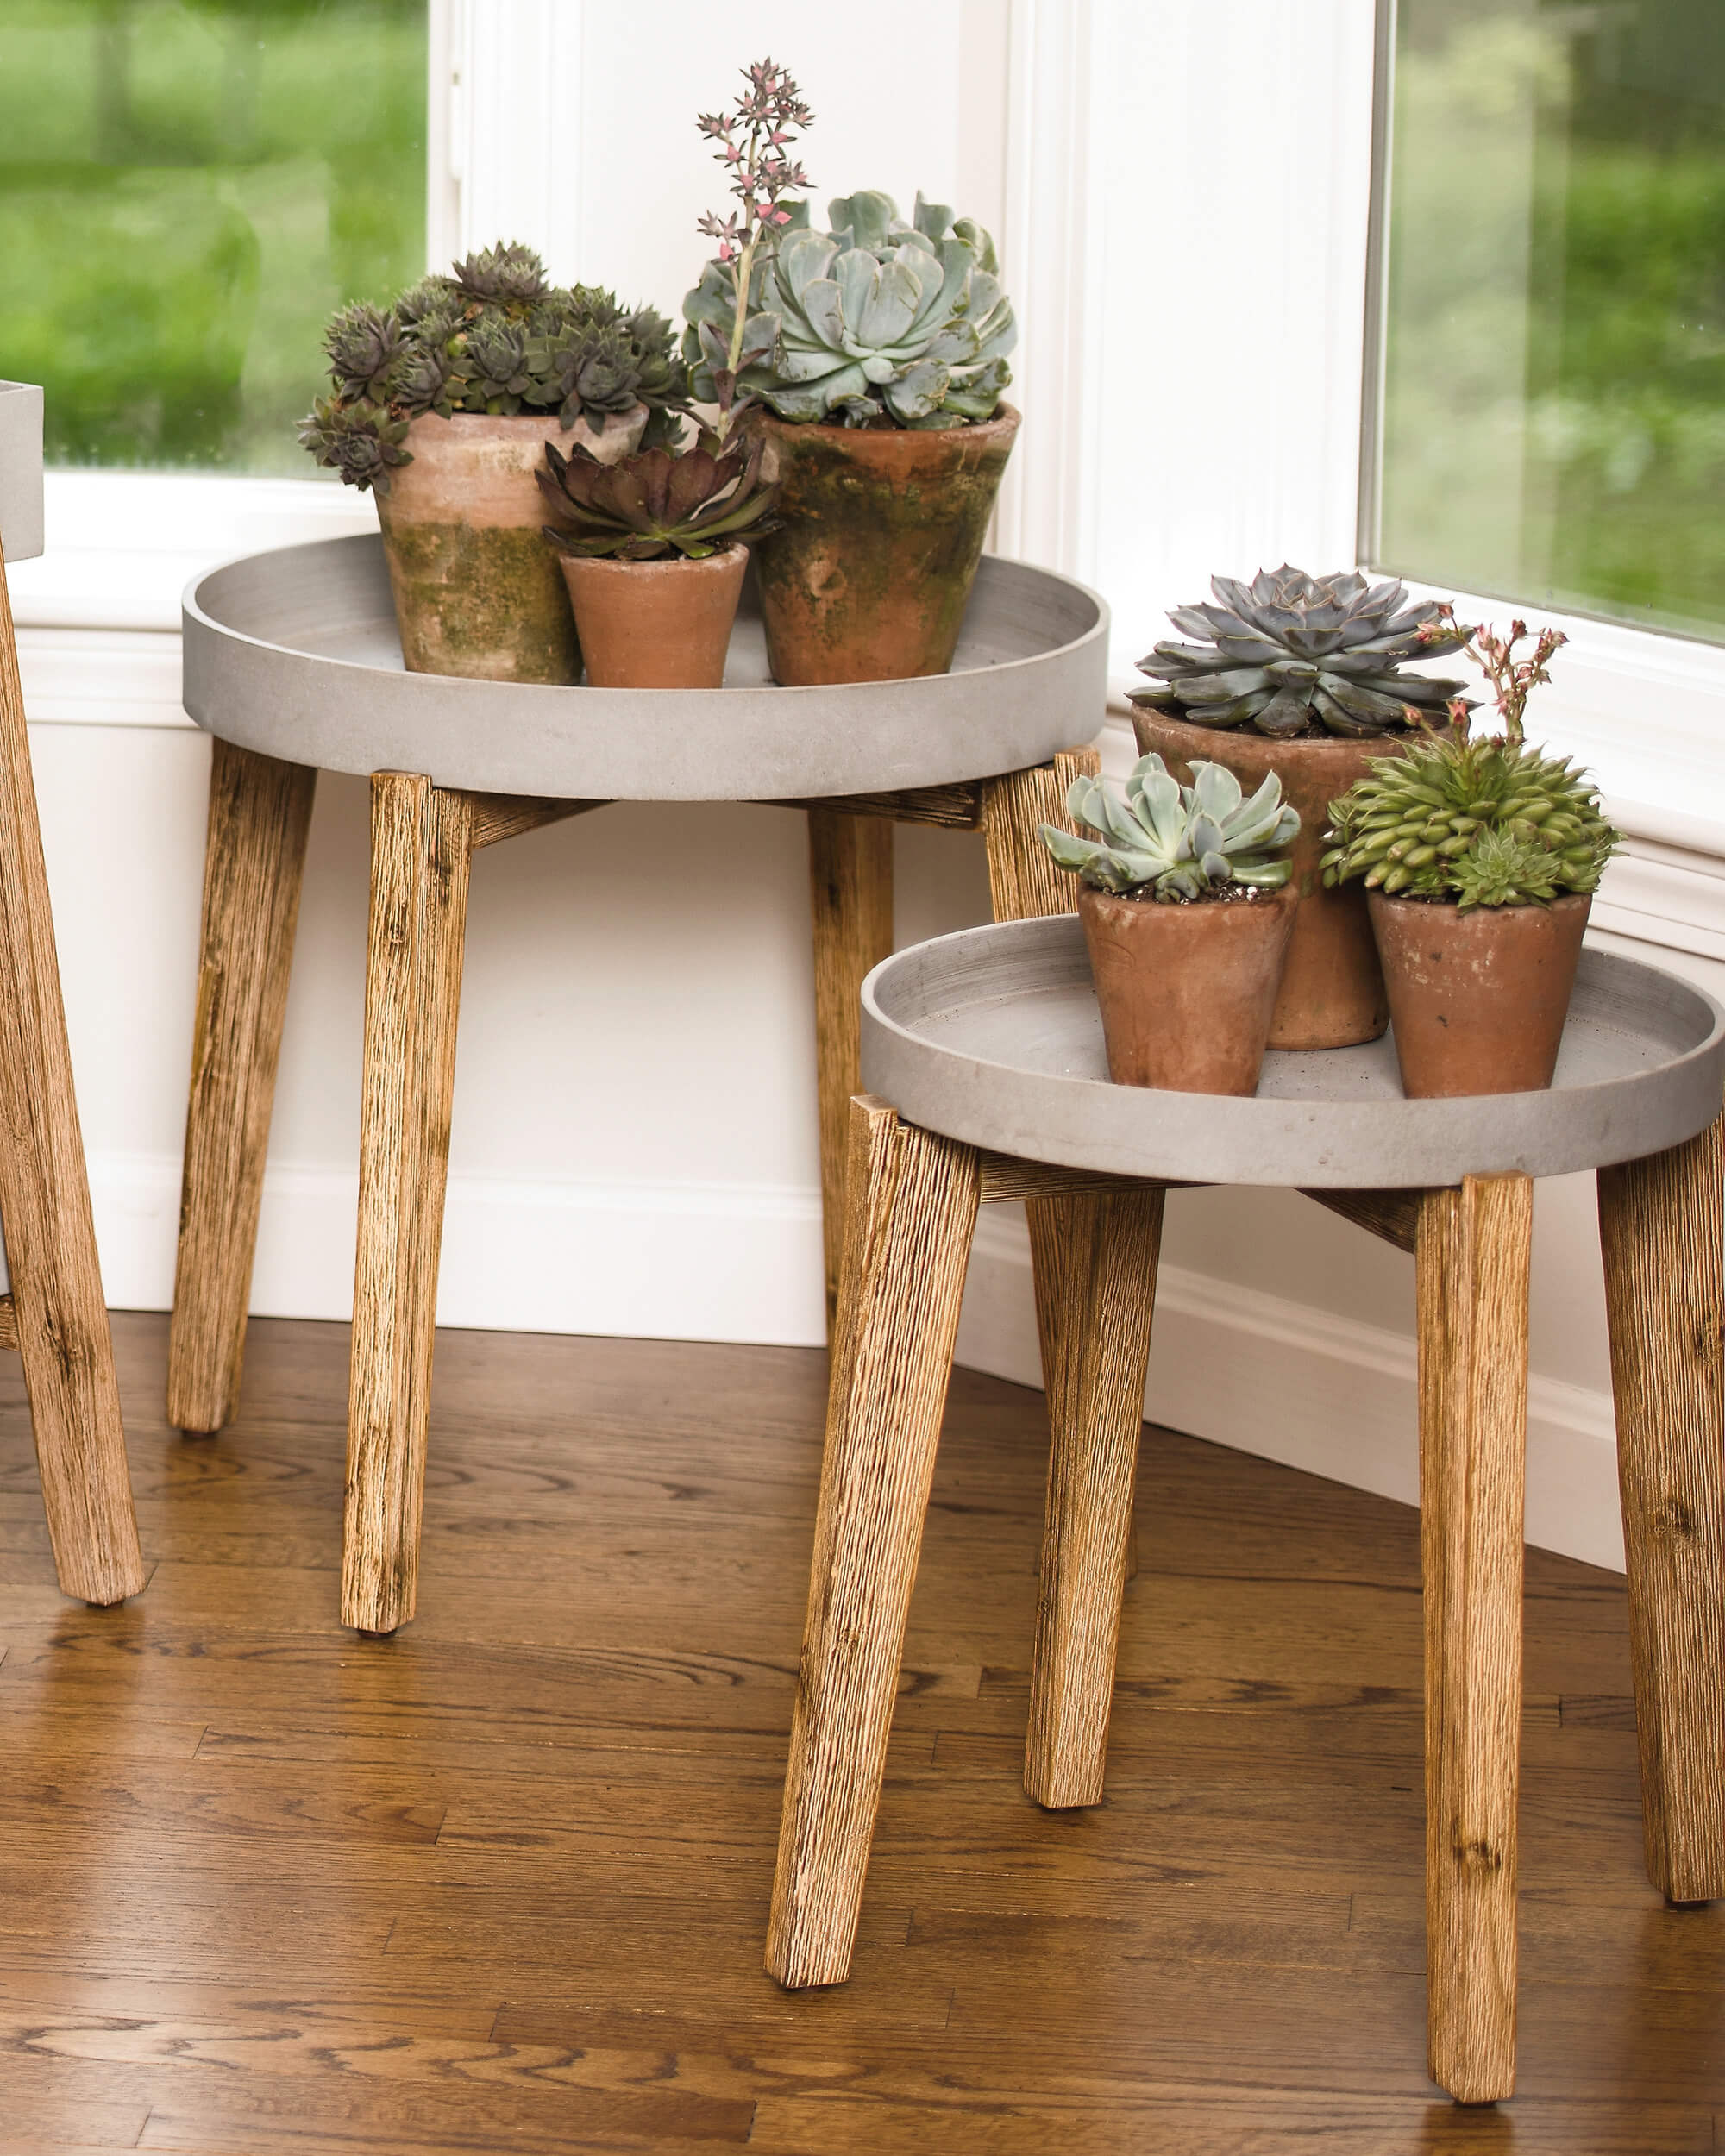 plant stand planter wooden tables round table stands garden plants wood terra gardeners tray standing diy choose homemydesign indoors stylish